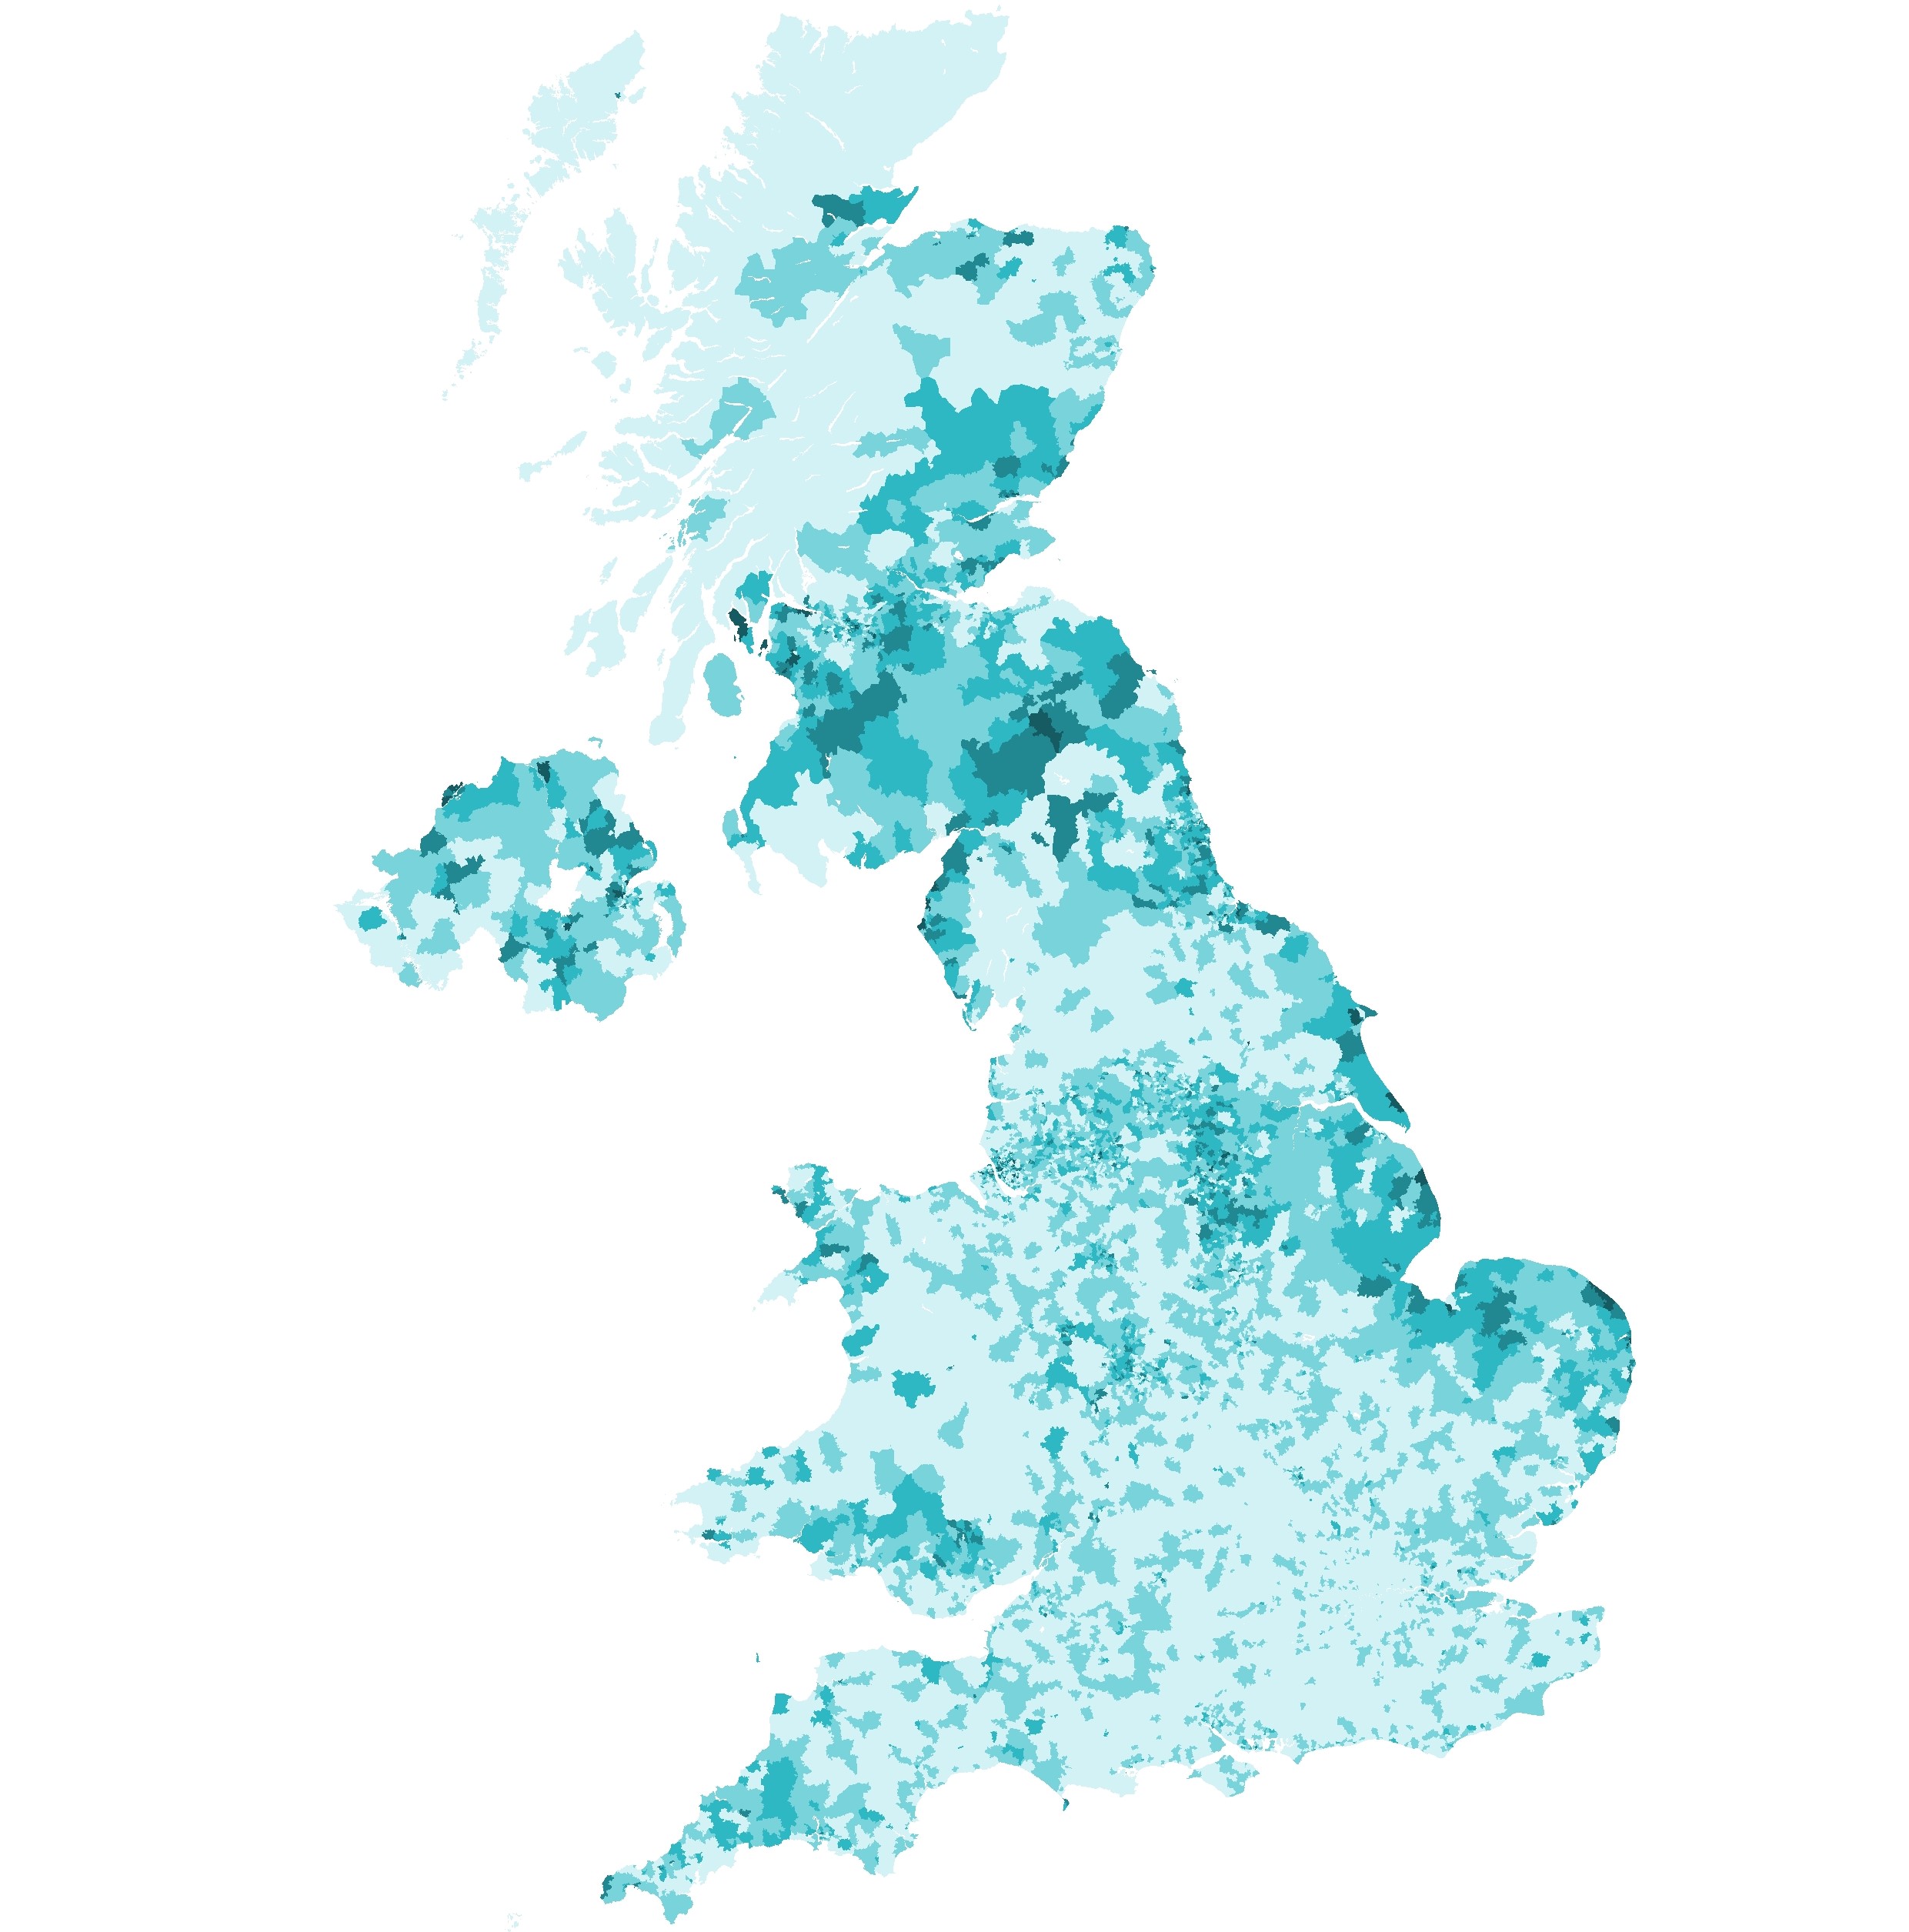 A heatmap shows the distribution of this segment across the UK, showing realtively uniform colour across the UK, with high concentrations in the North of England and Scottish Borders, as well as the east coast of the UK.